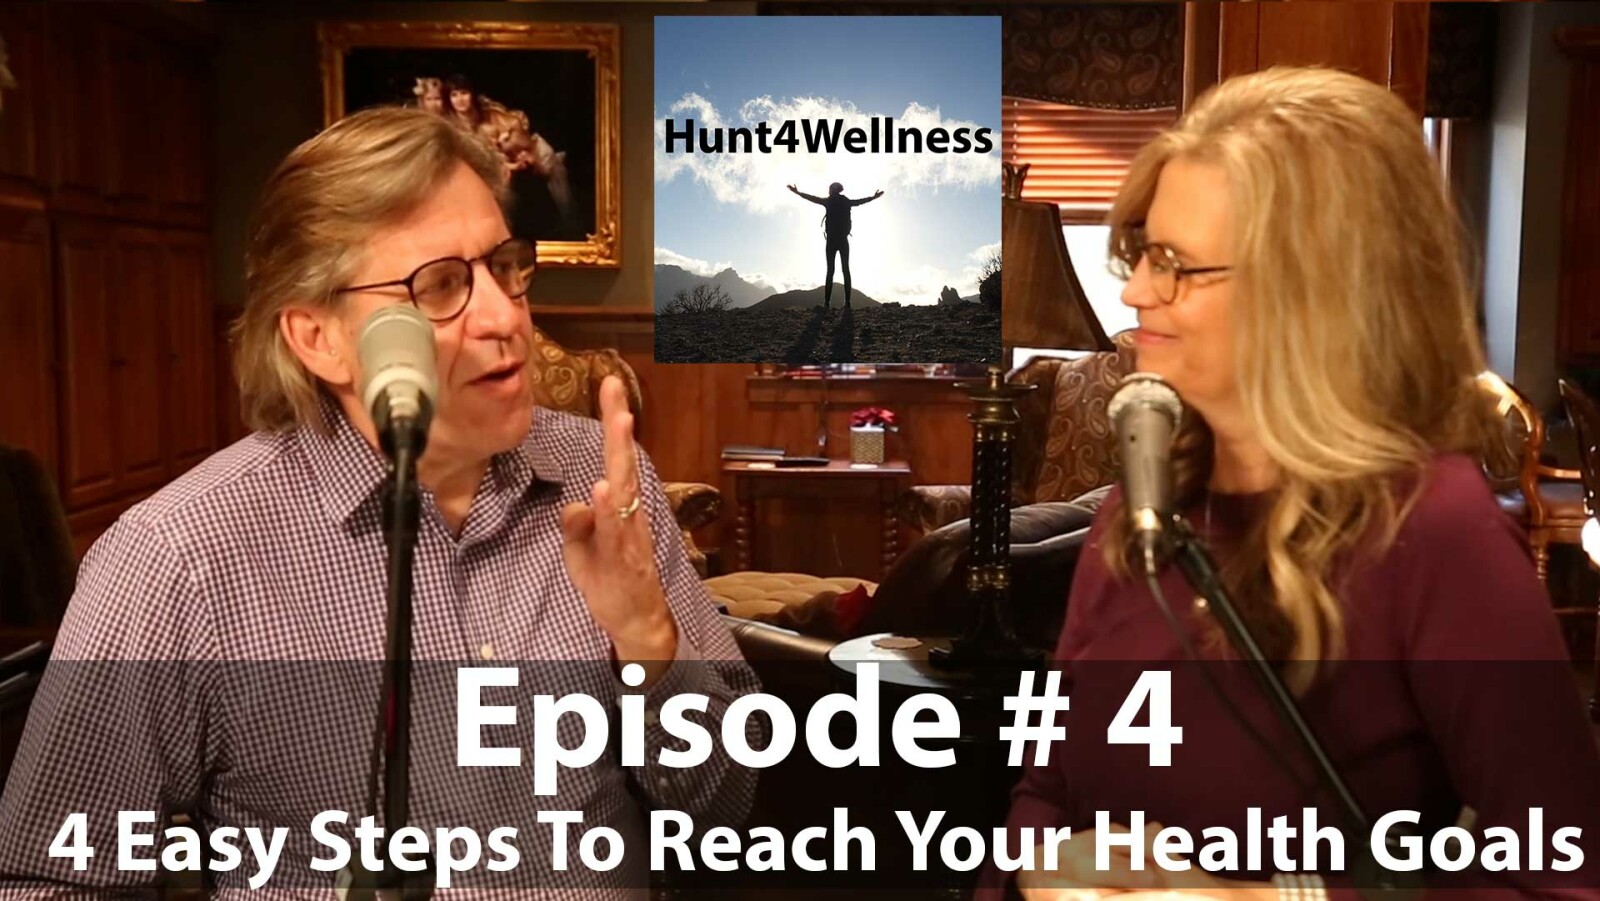 Episode #4 - 4 Easy Steps to Reach Your Health Goals